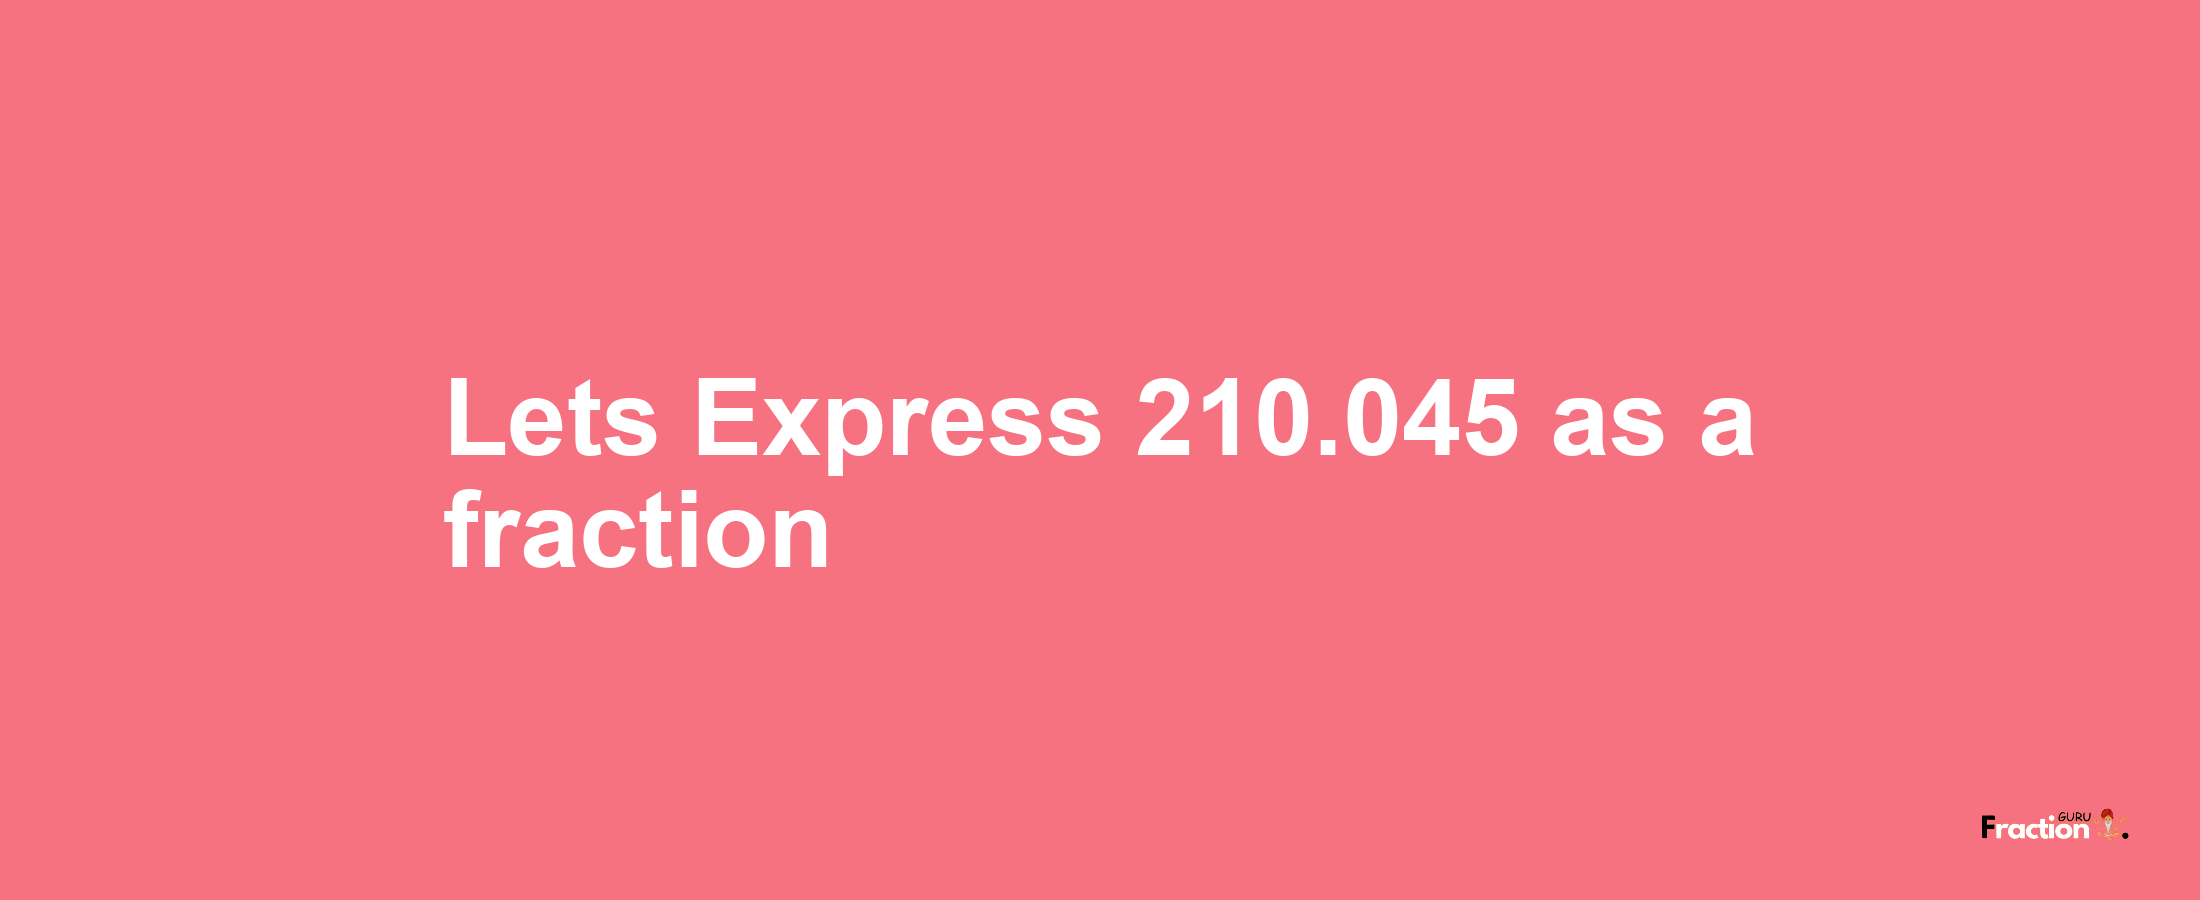 Lets Express 210.045 as afraction